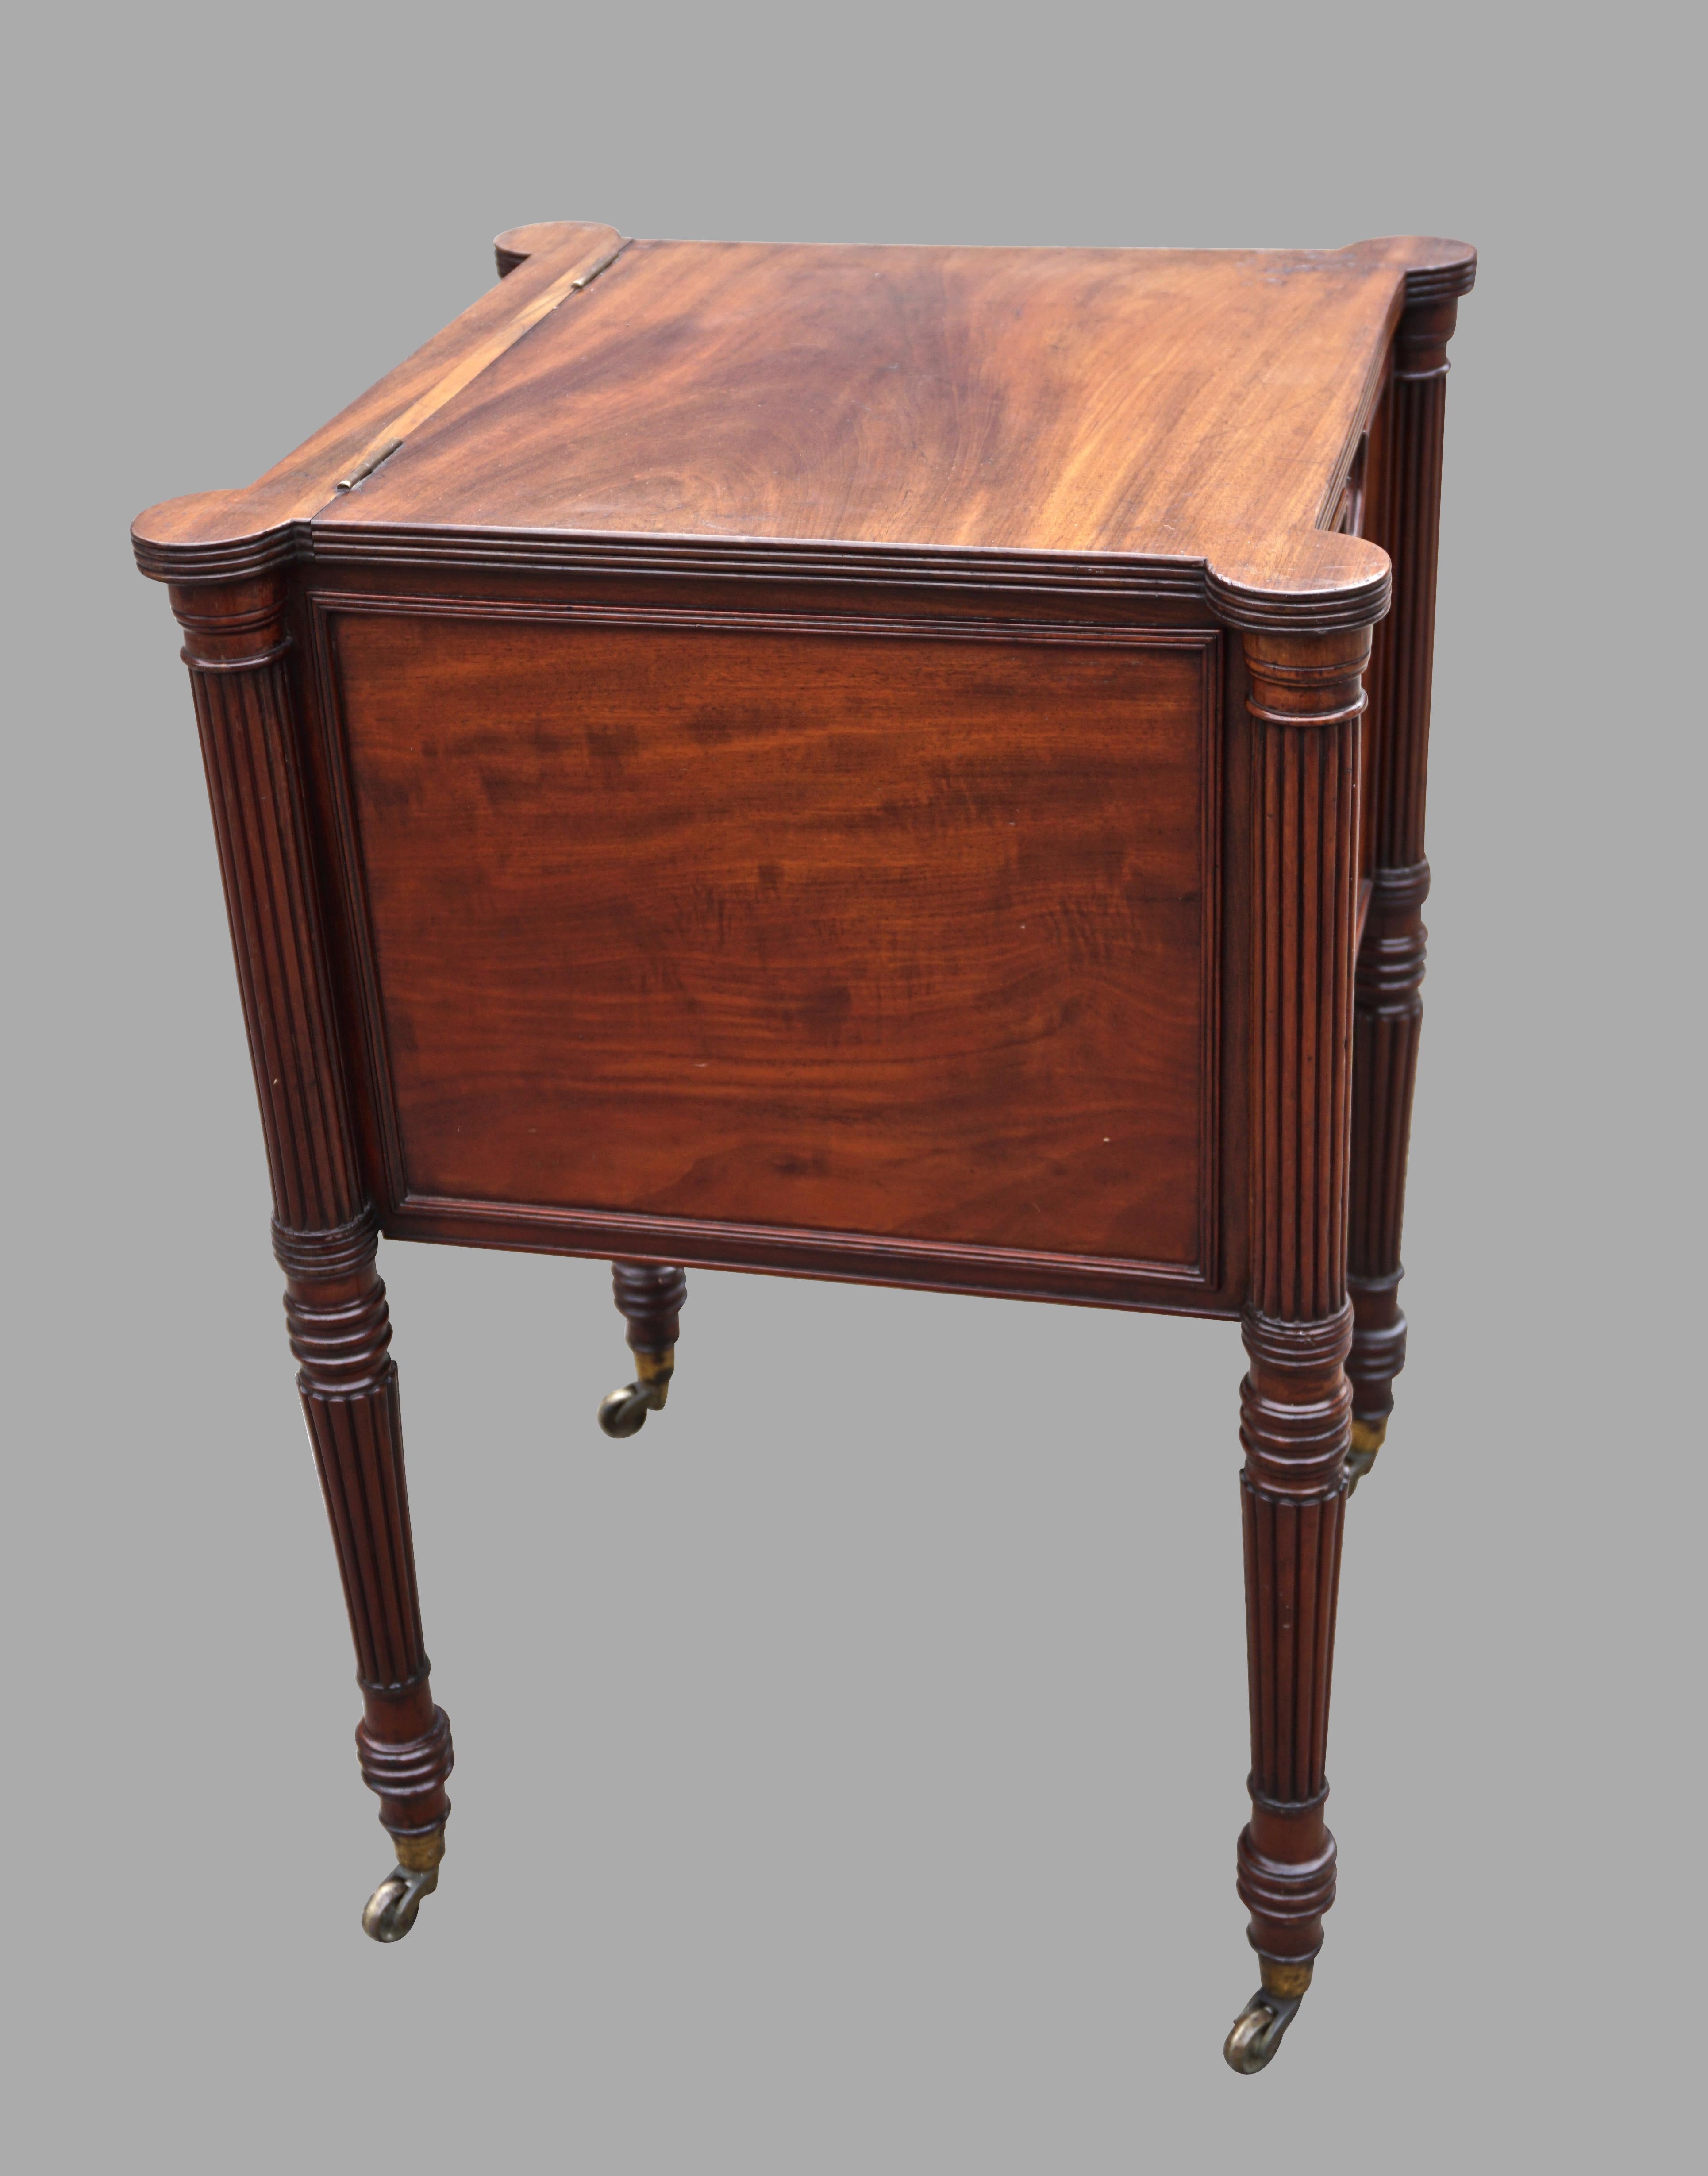 English Regency Period Mahogany Cellarette in the Manner of Gillows 2